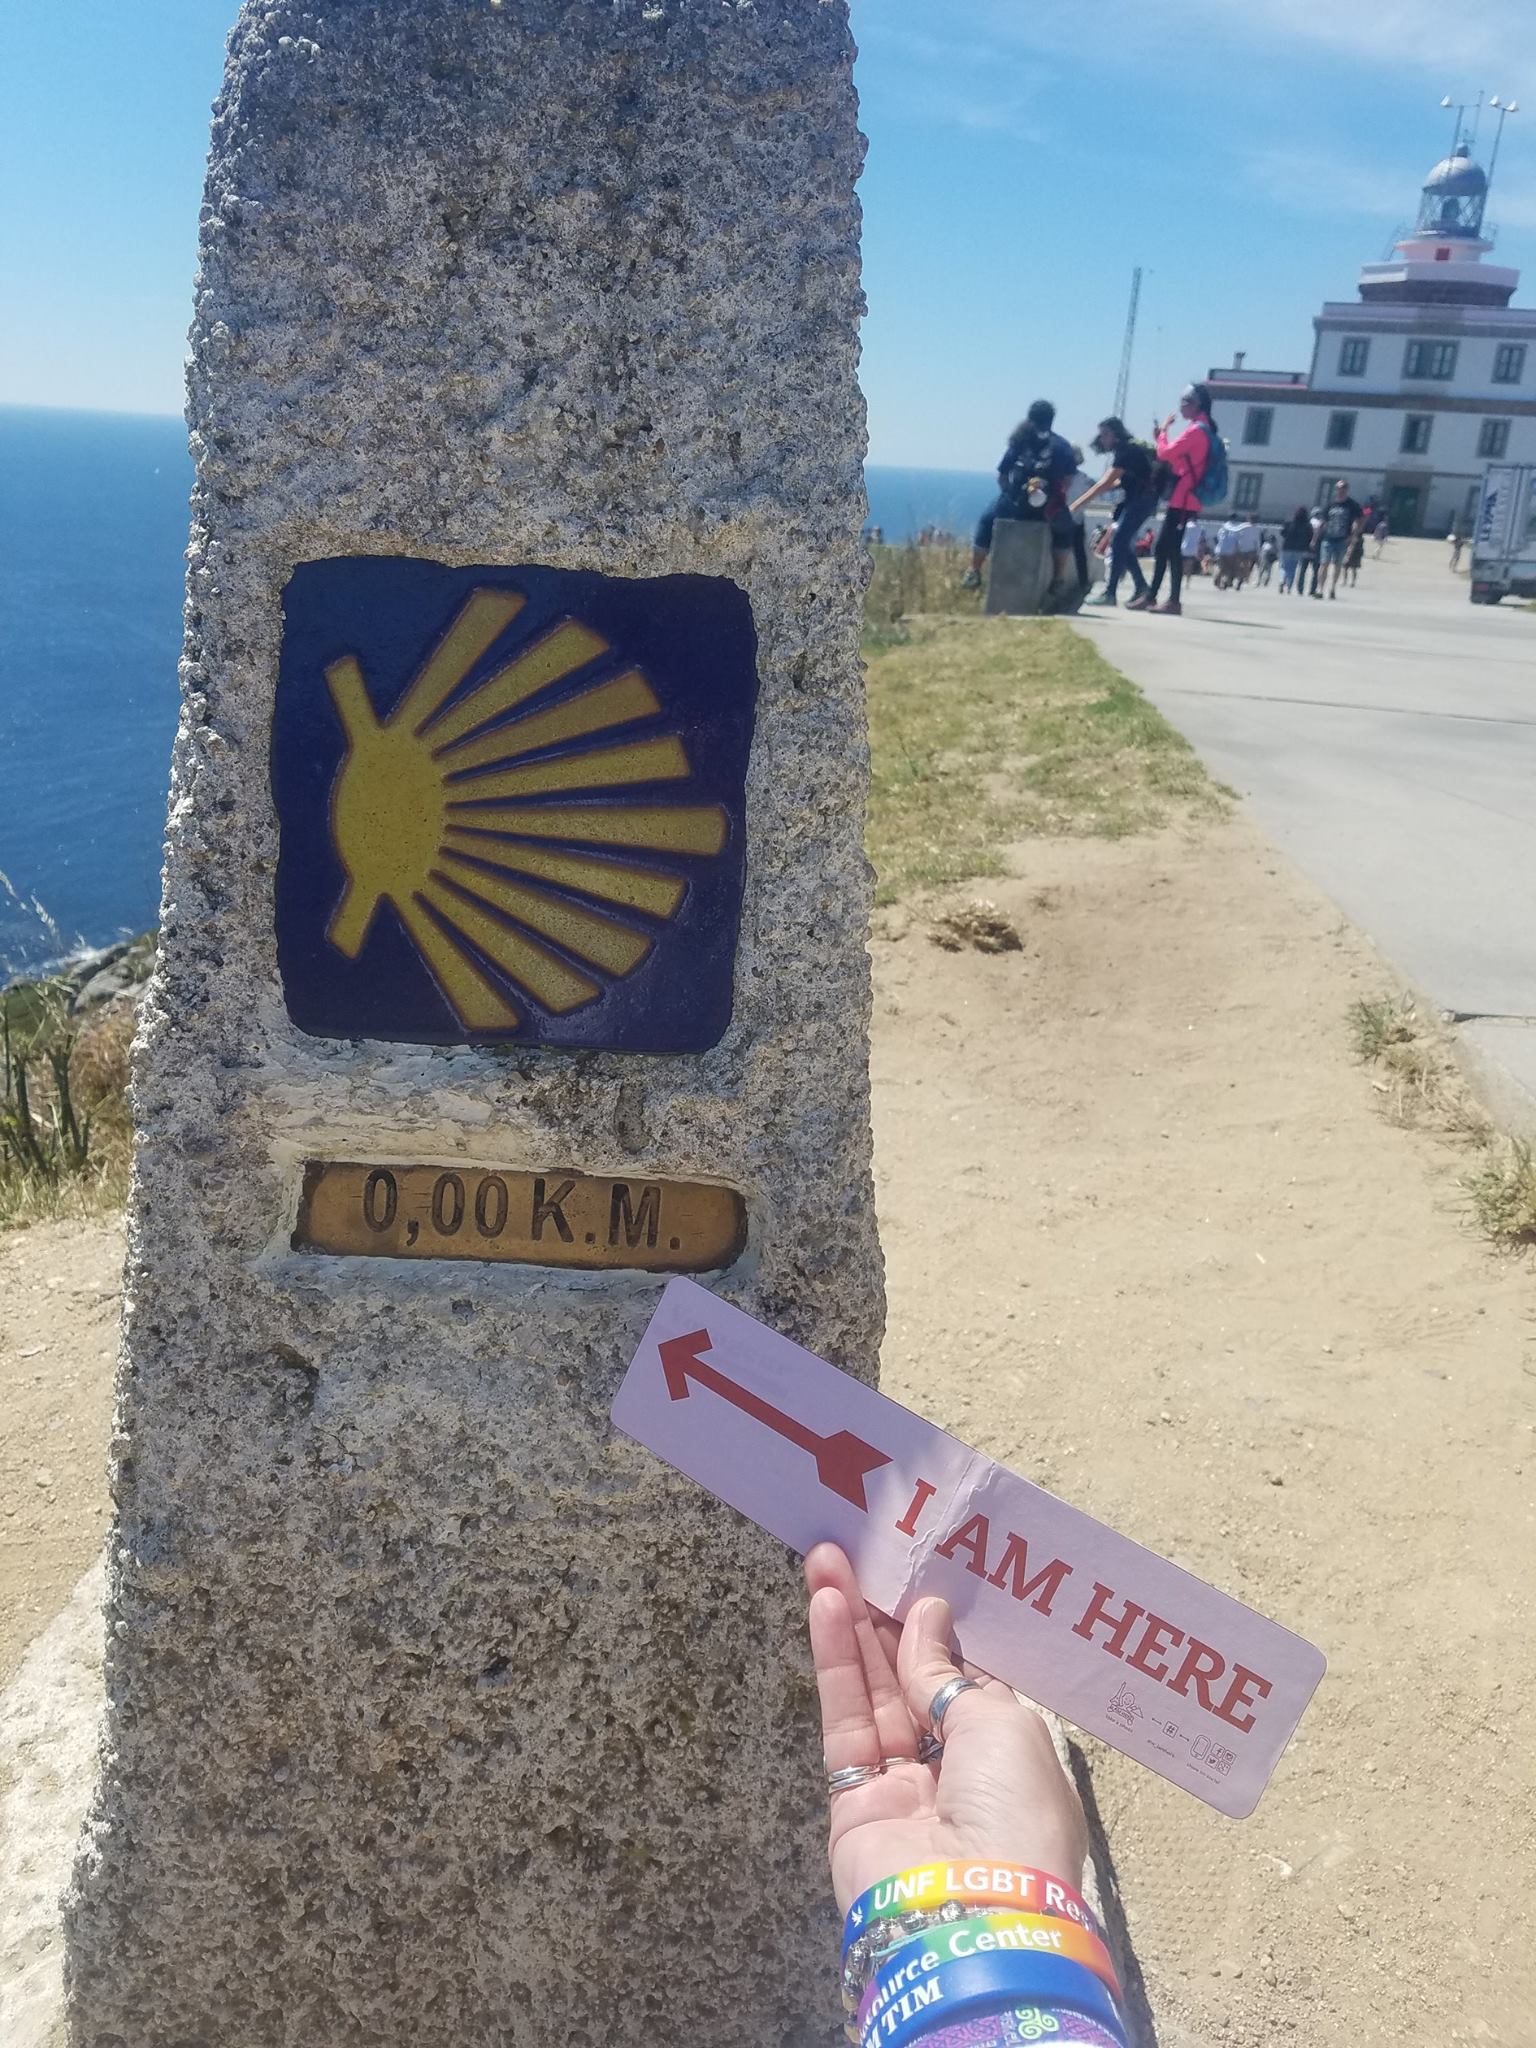 Fisterra – The End of the World, The End of the Camino de Santiago